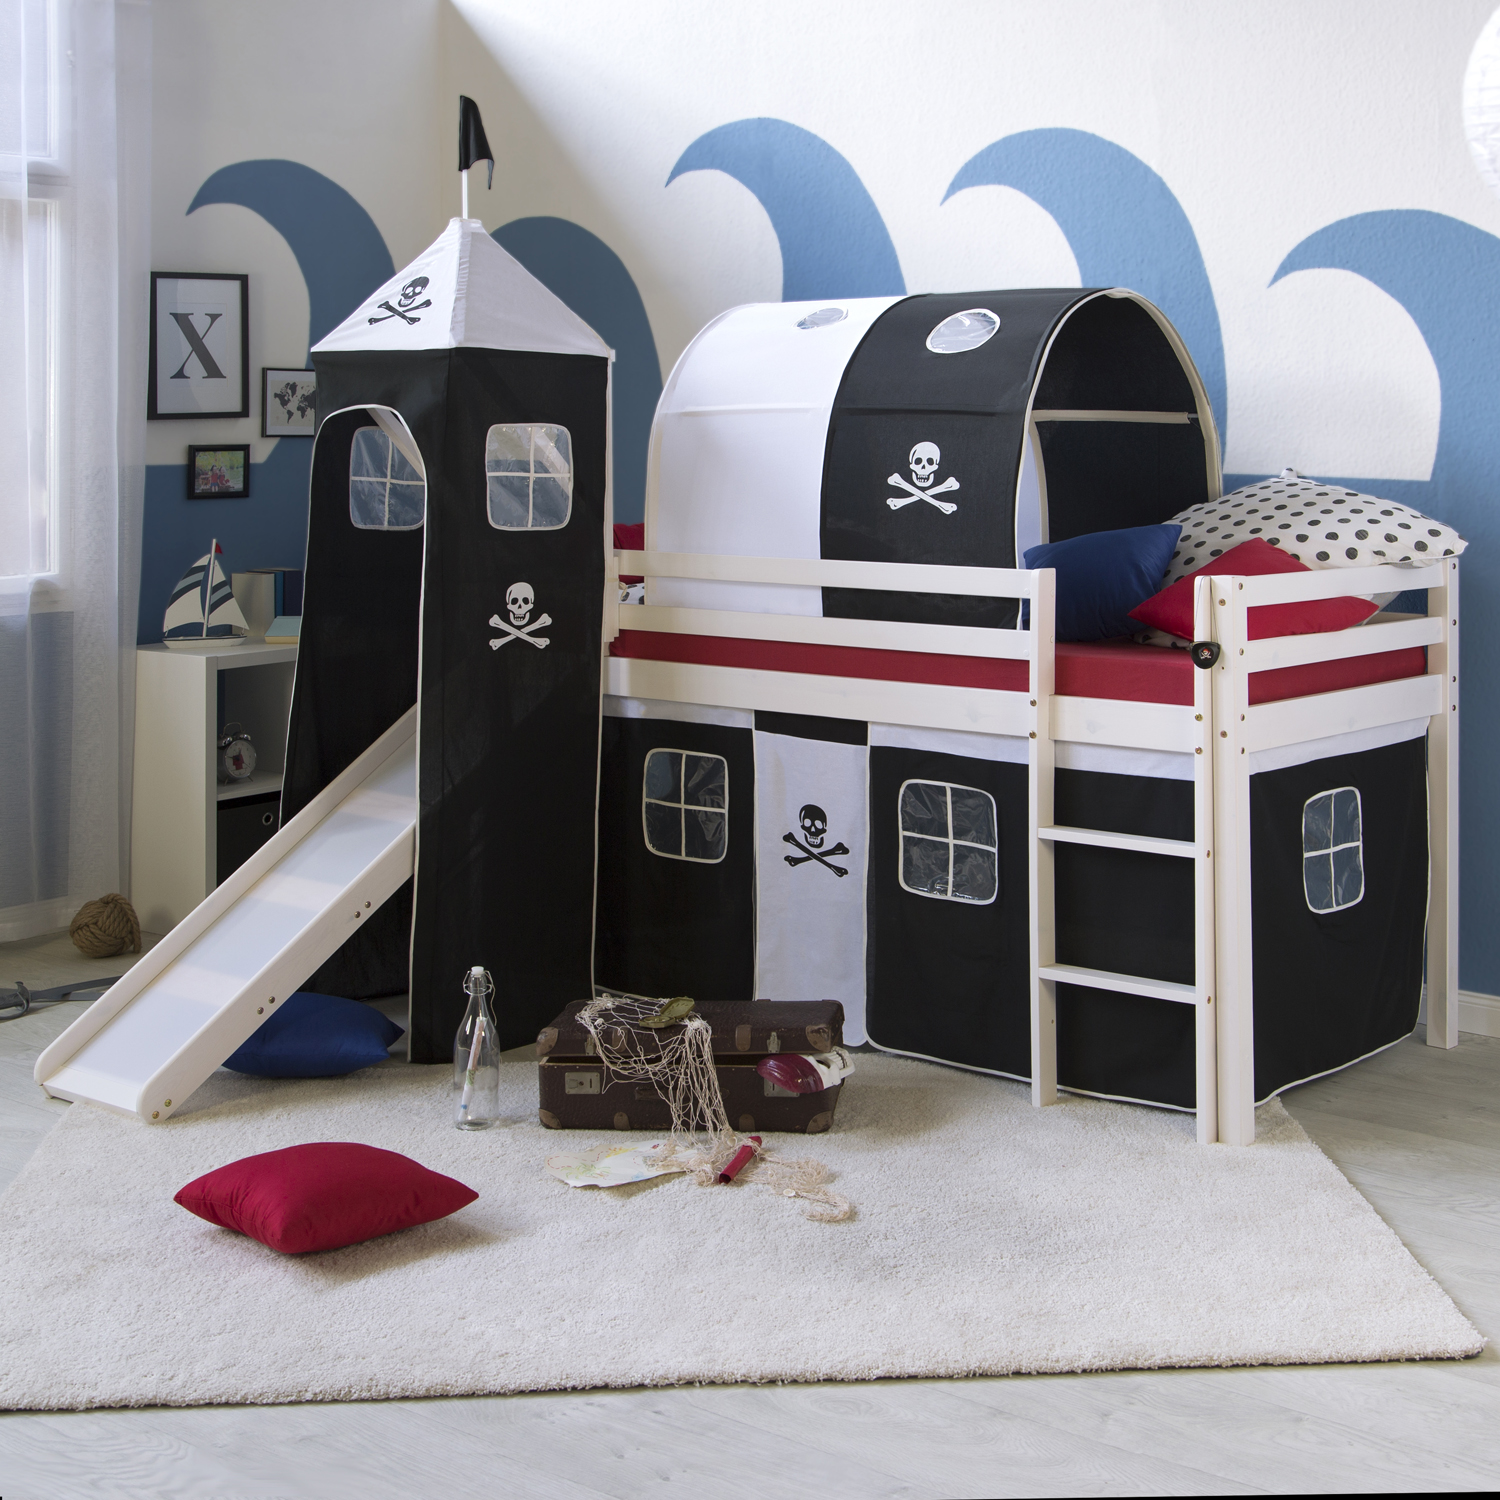 Childrens Bed Tunnel Bed Tent Bunk Bed Cabin Bed accessories black